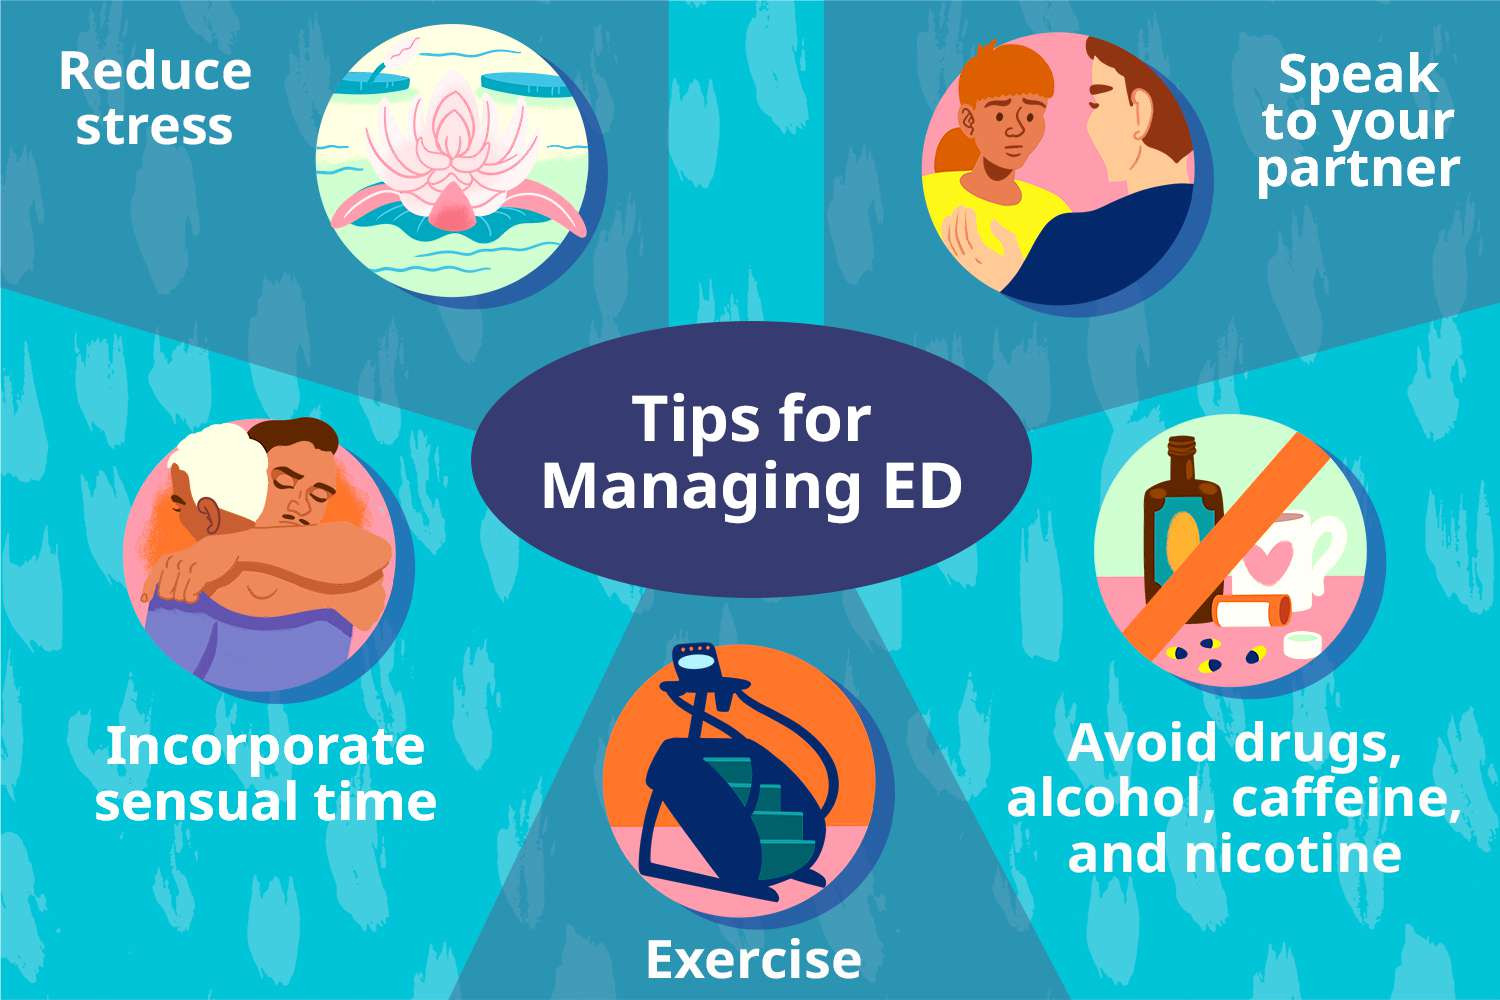 How do I know that I am affecting from ED (Erectile Dysfunction) ?